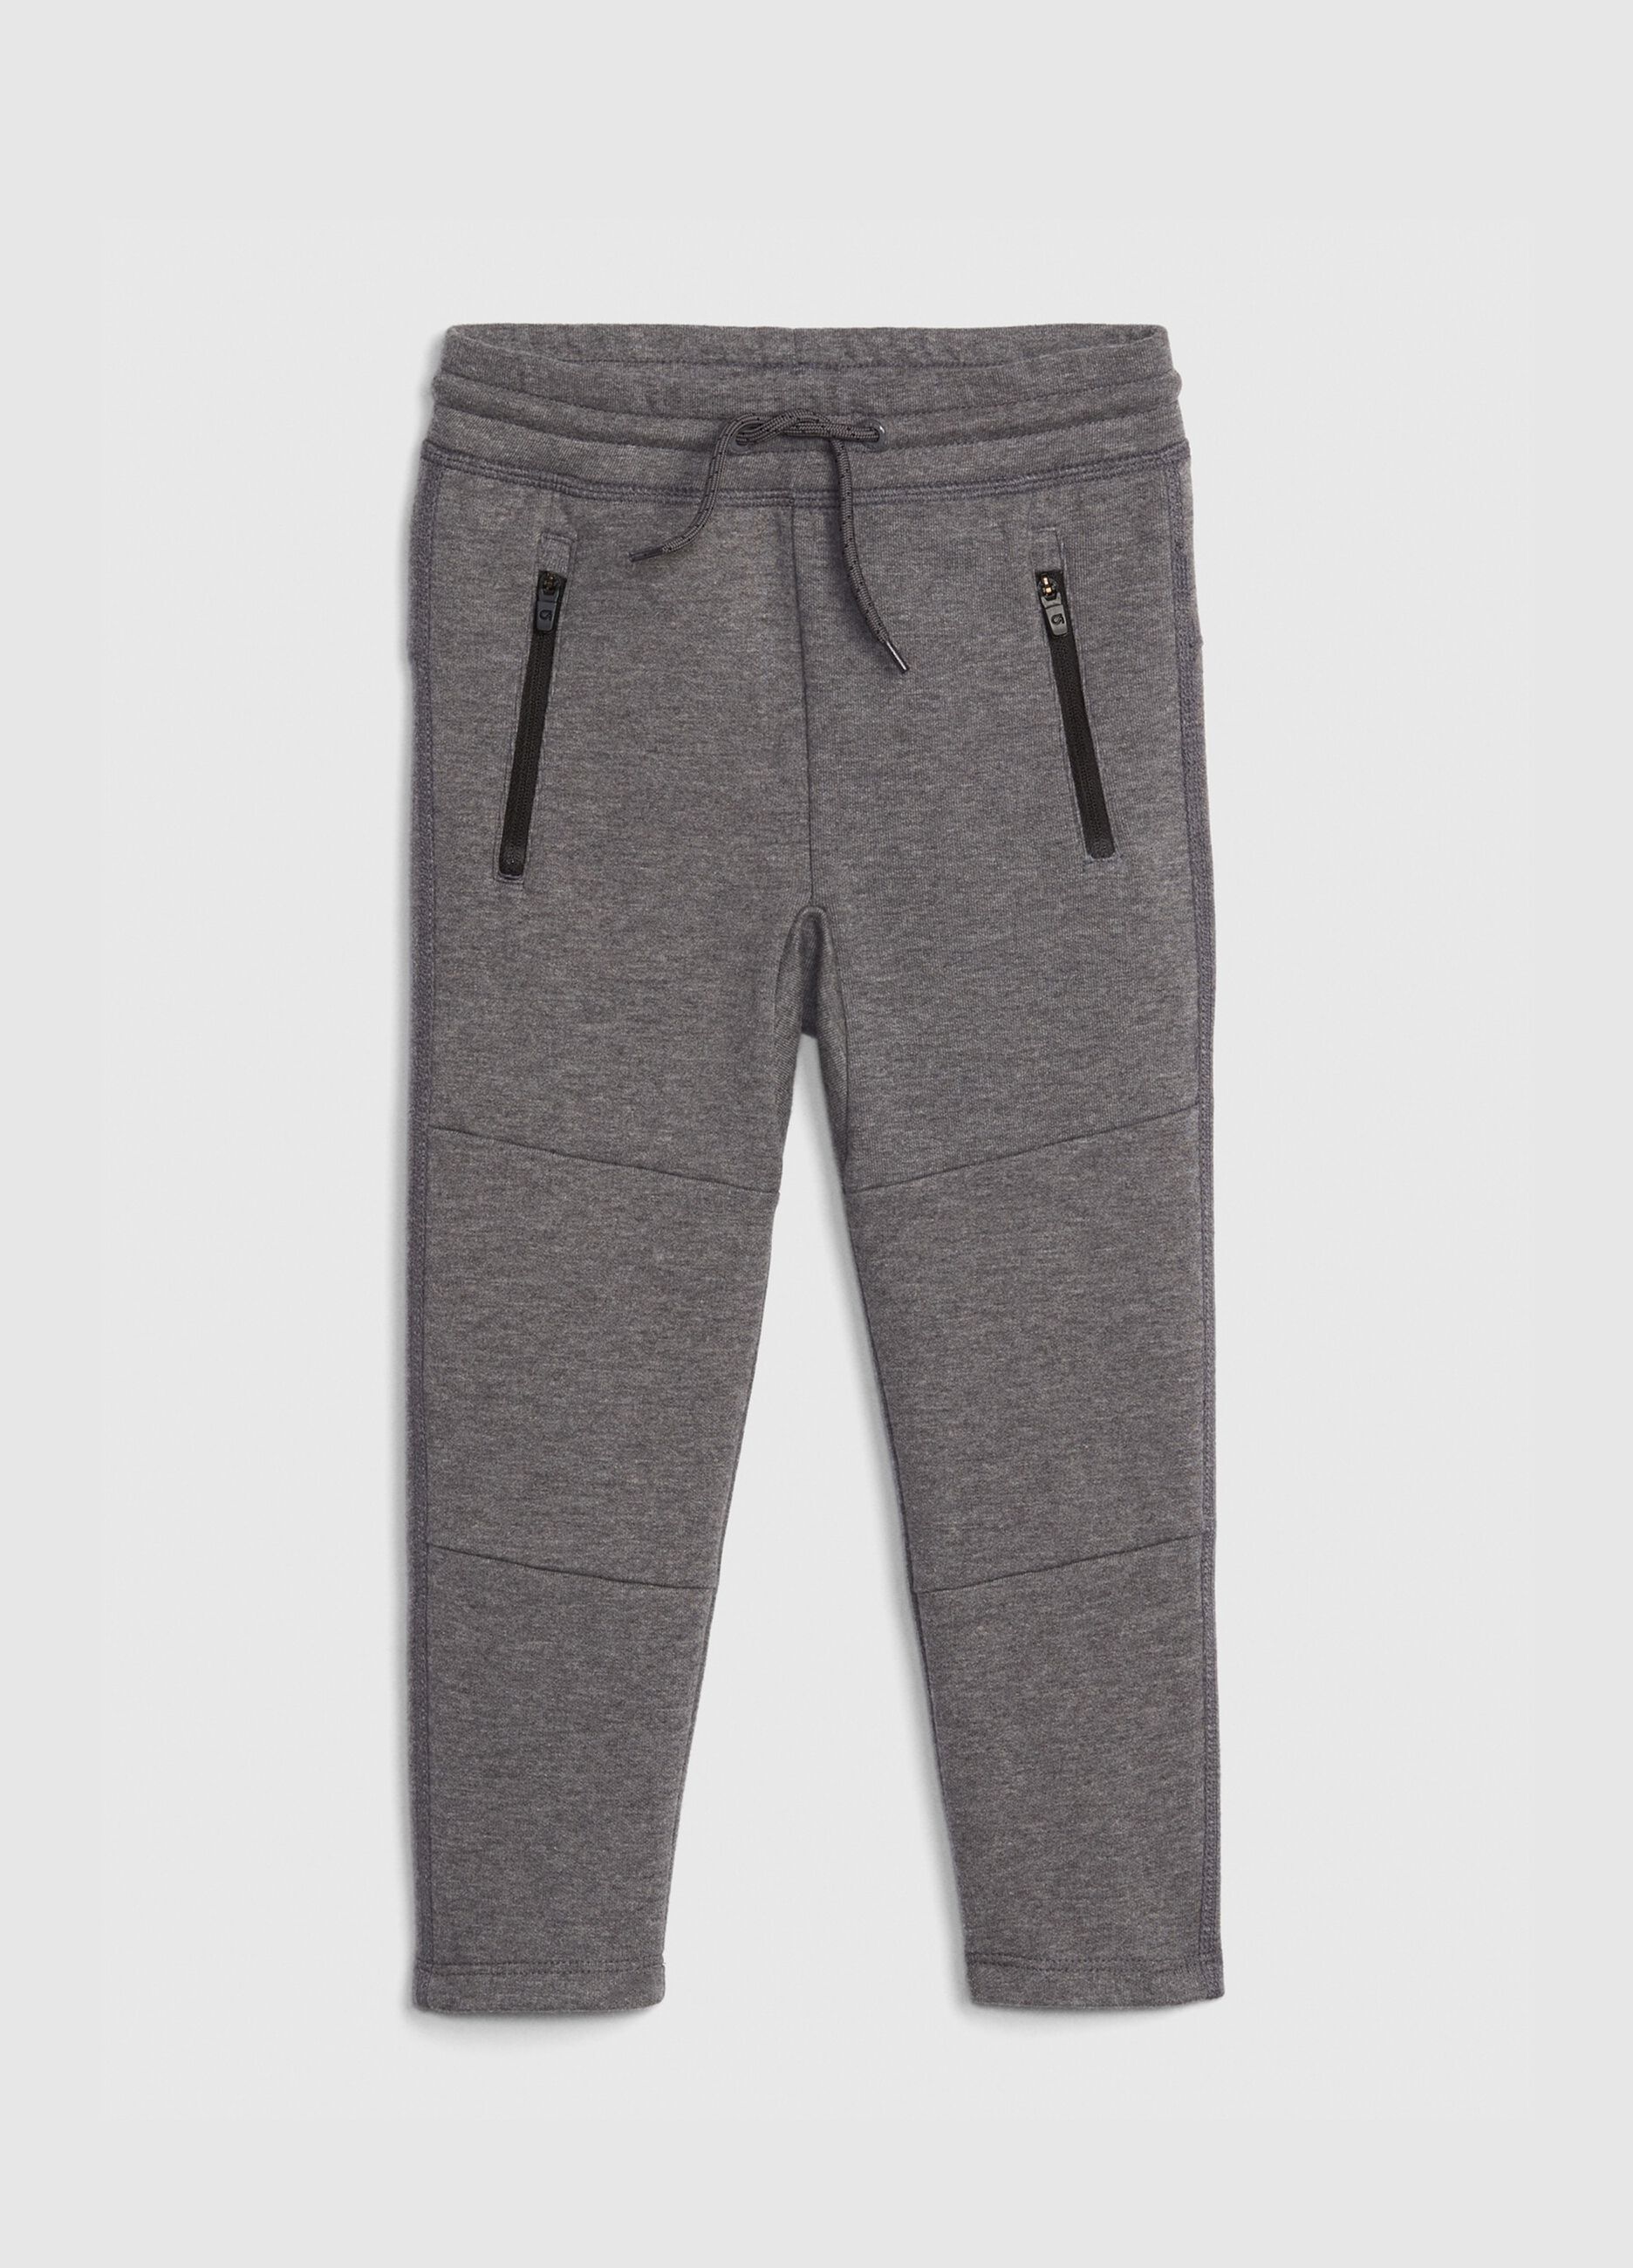 Joggers in technical fabric